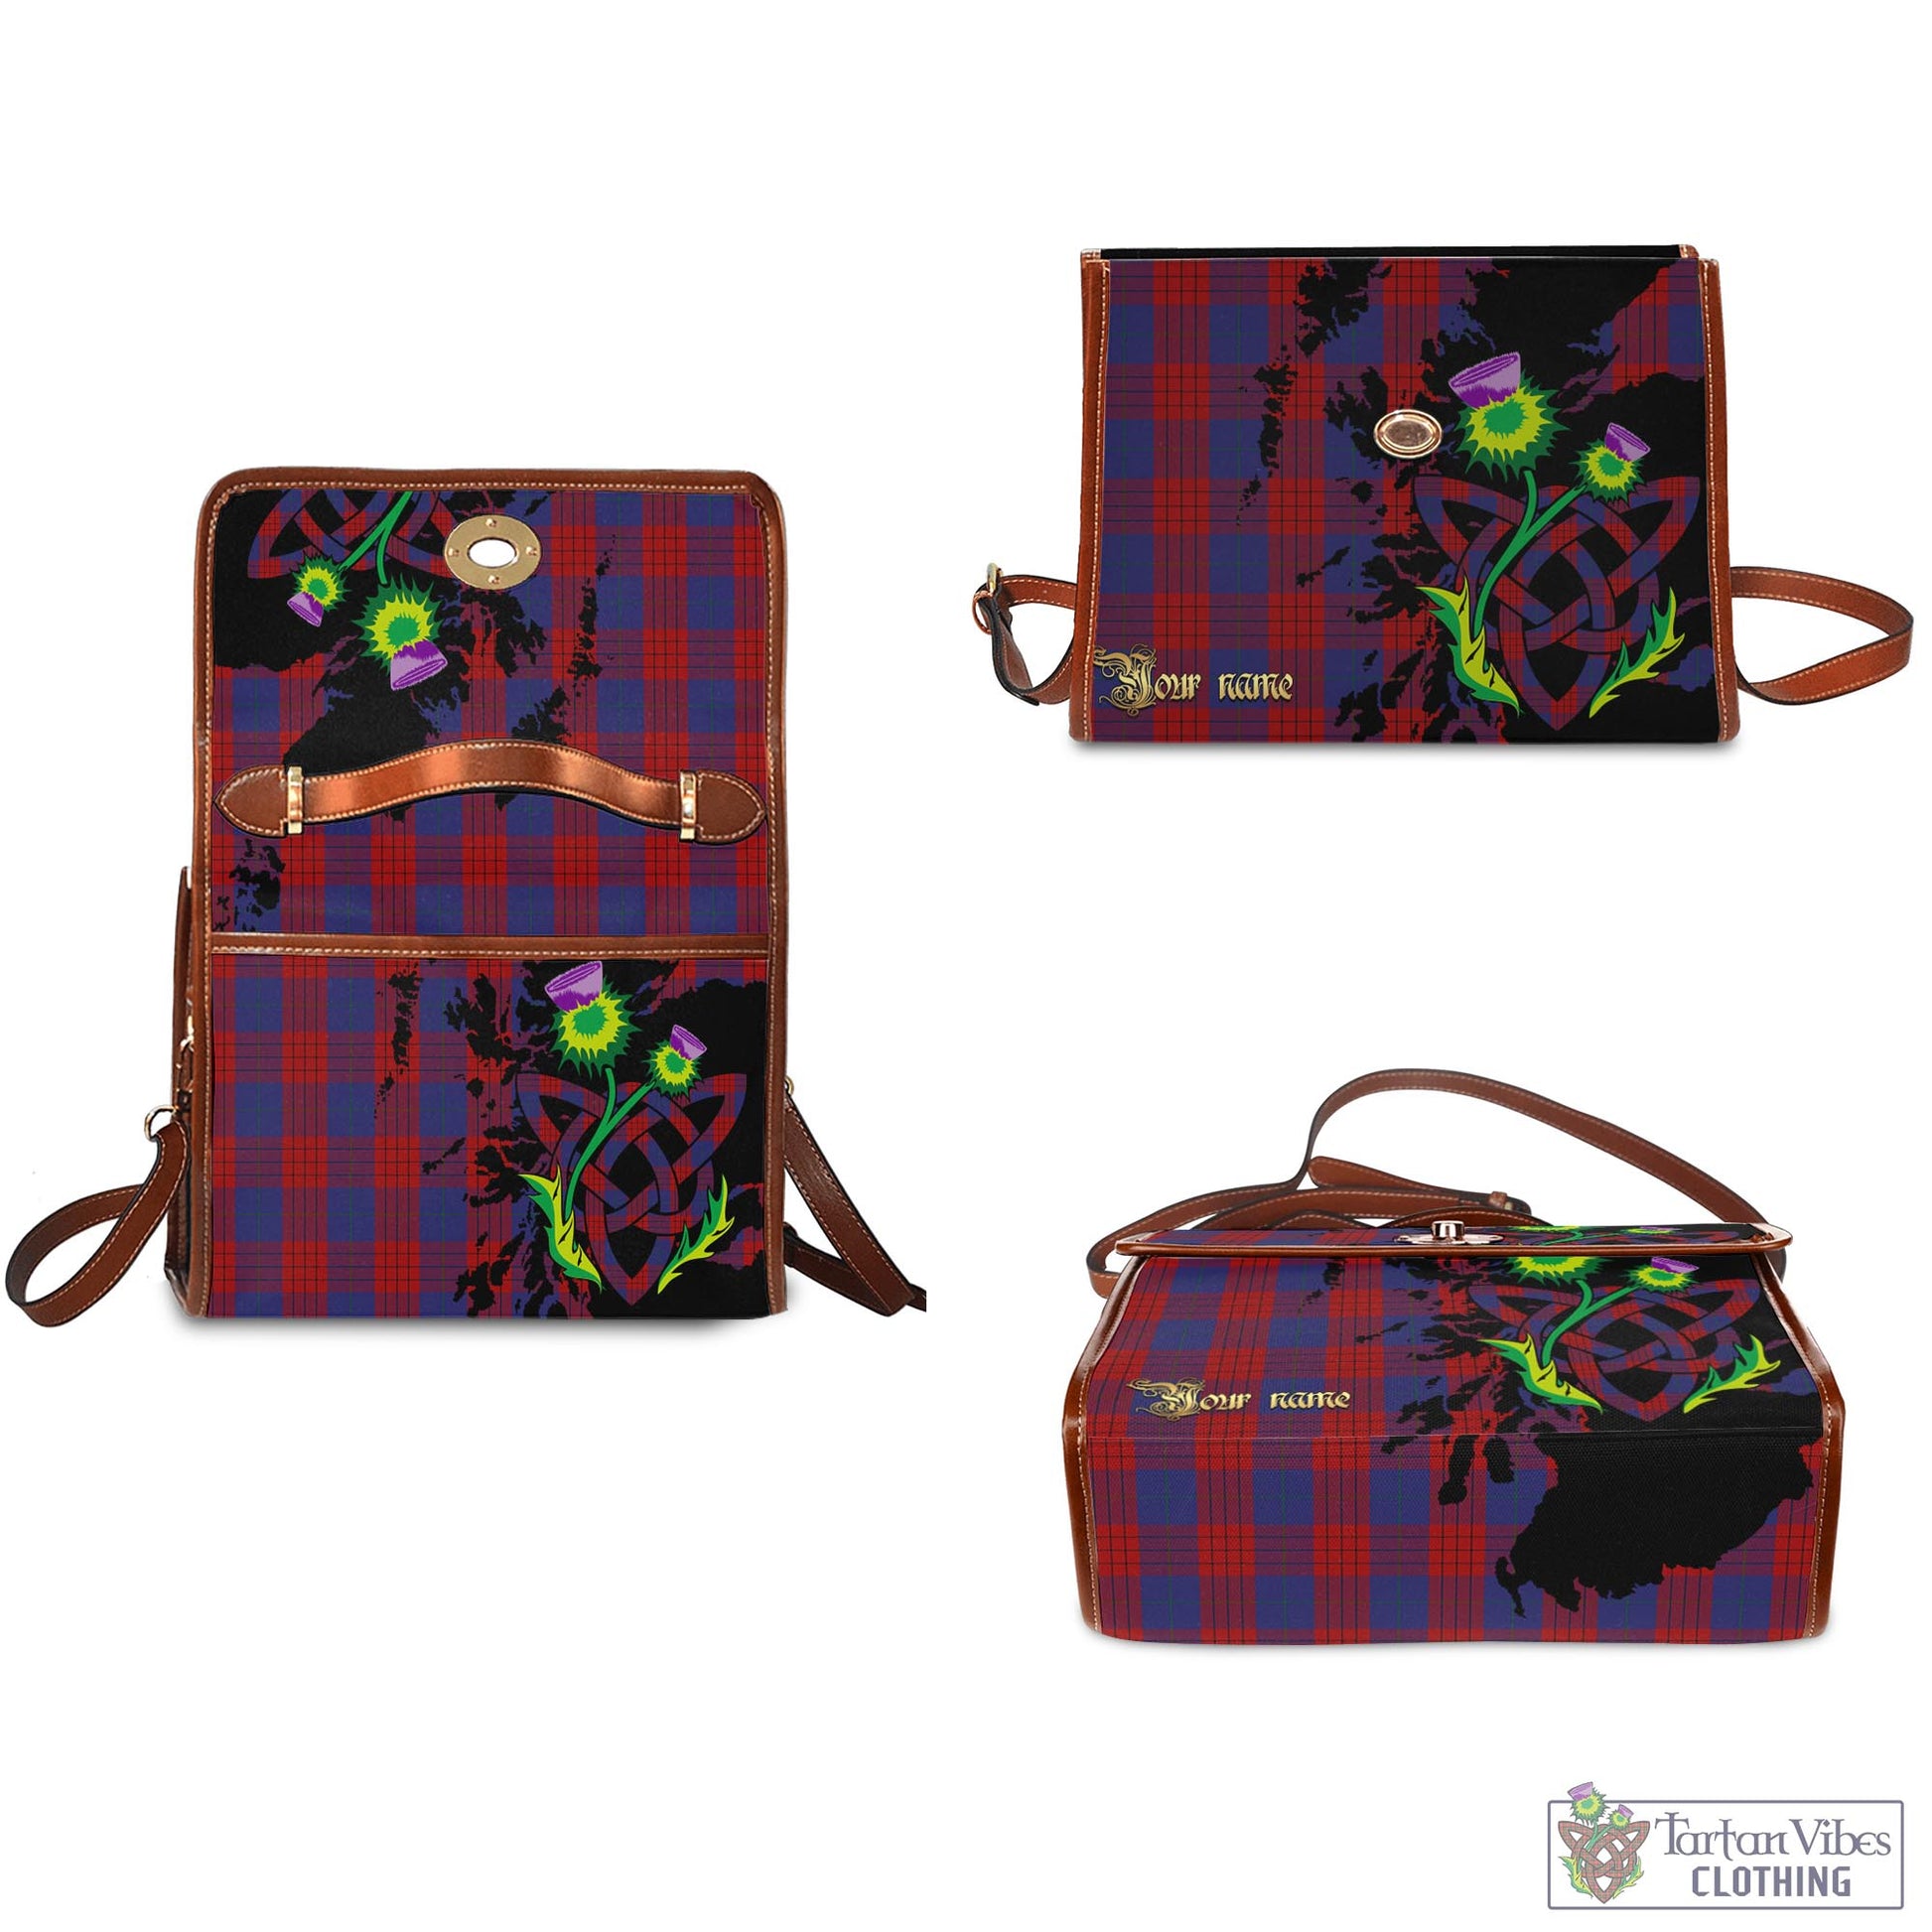 Tartan Vibes Clothing Robinson Tartan Waterproof Canvas Bag with Scotland Map and Thistle Celtic Accents